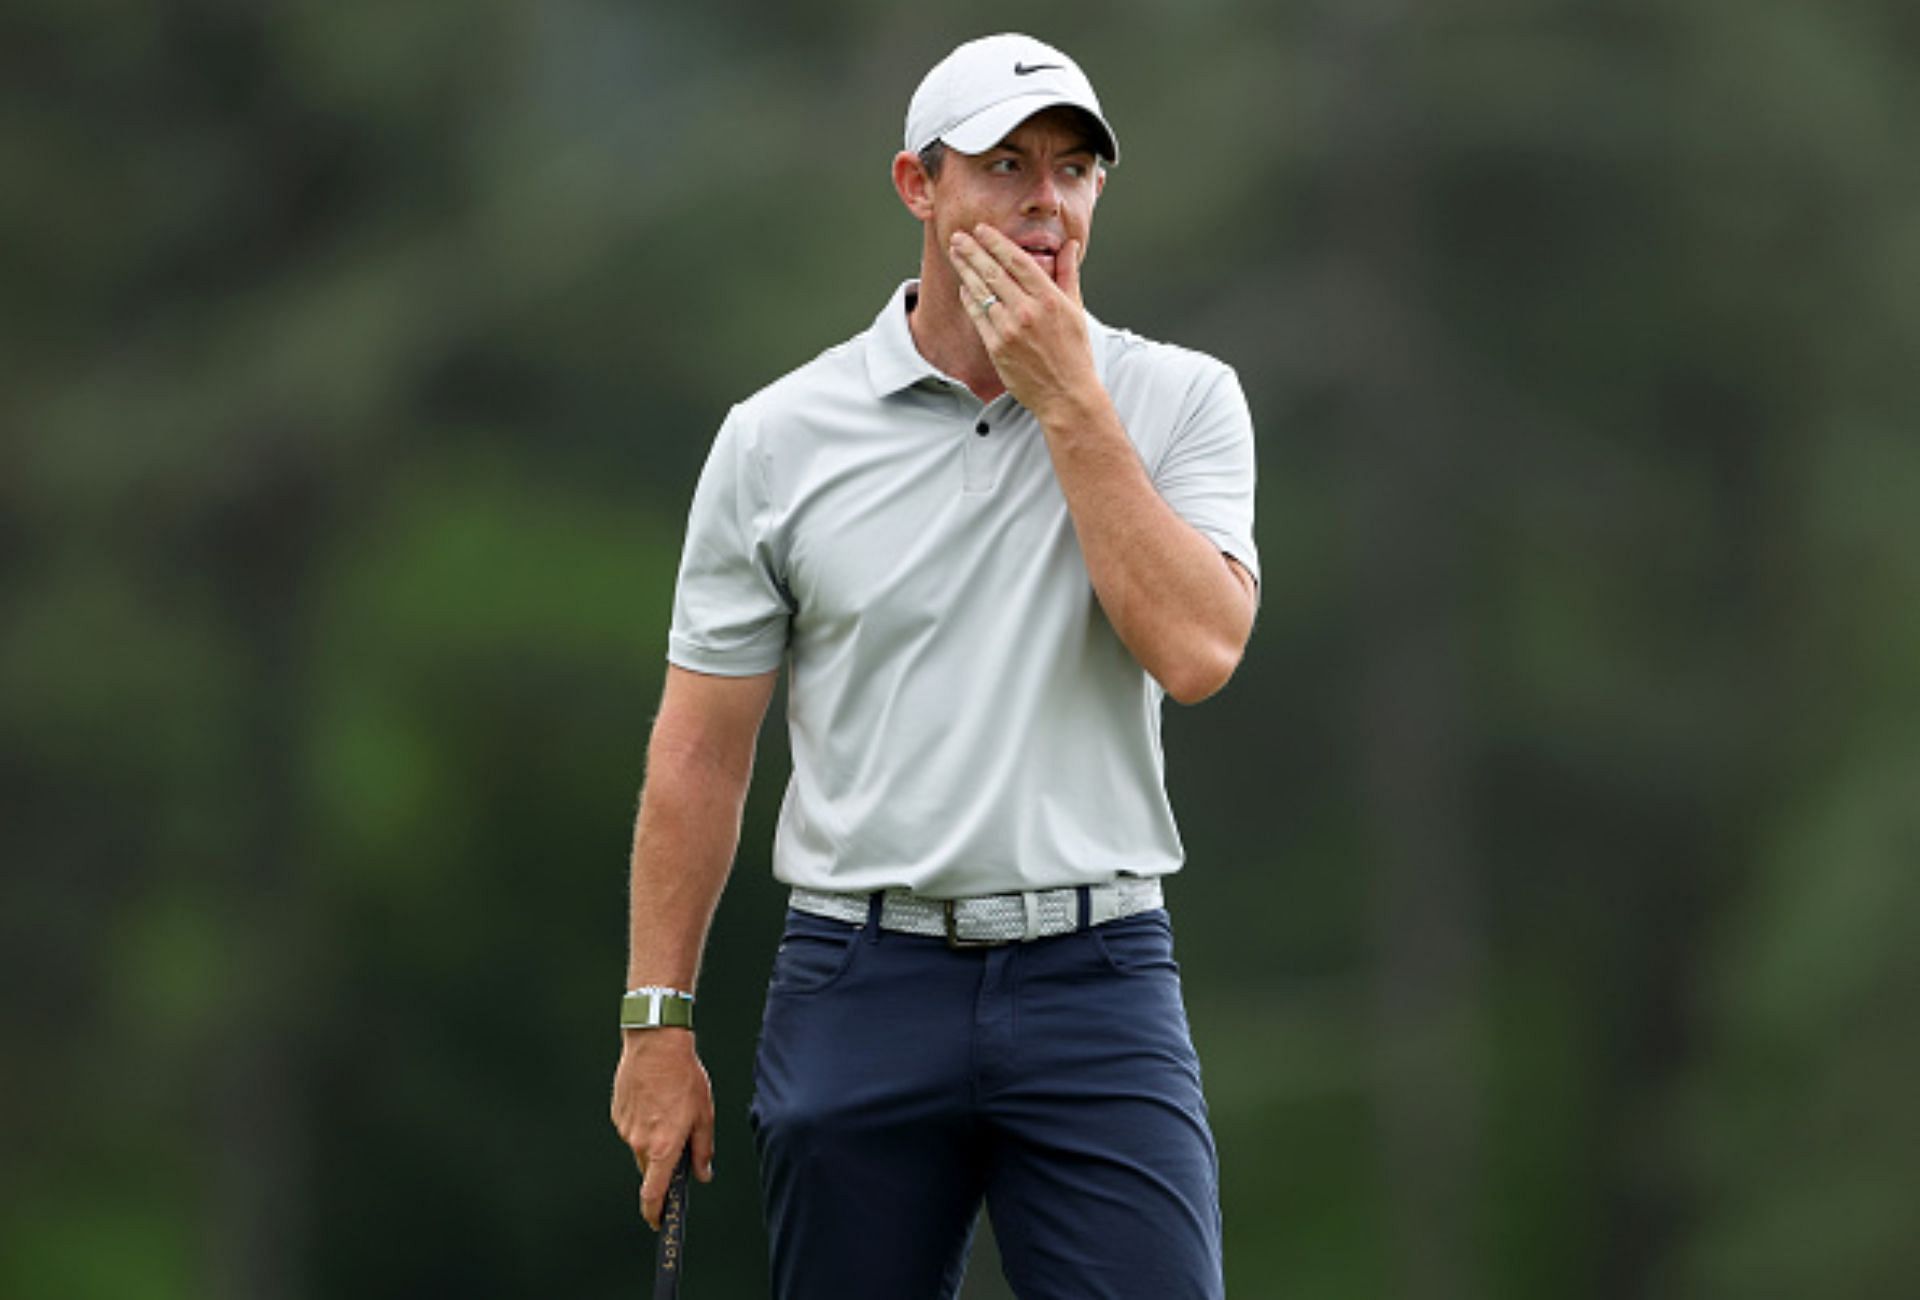 Rory McIlroy thinks Jon Rahm will not be banned from the Ryder Cup (Image via Getty).